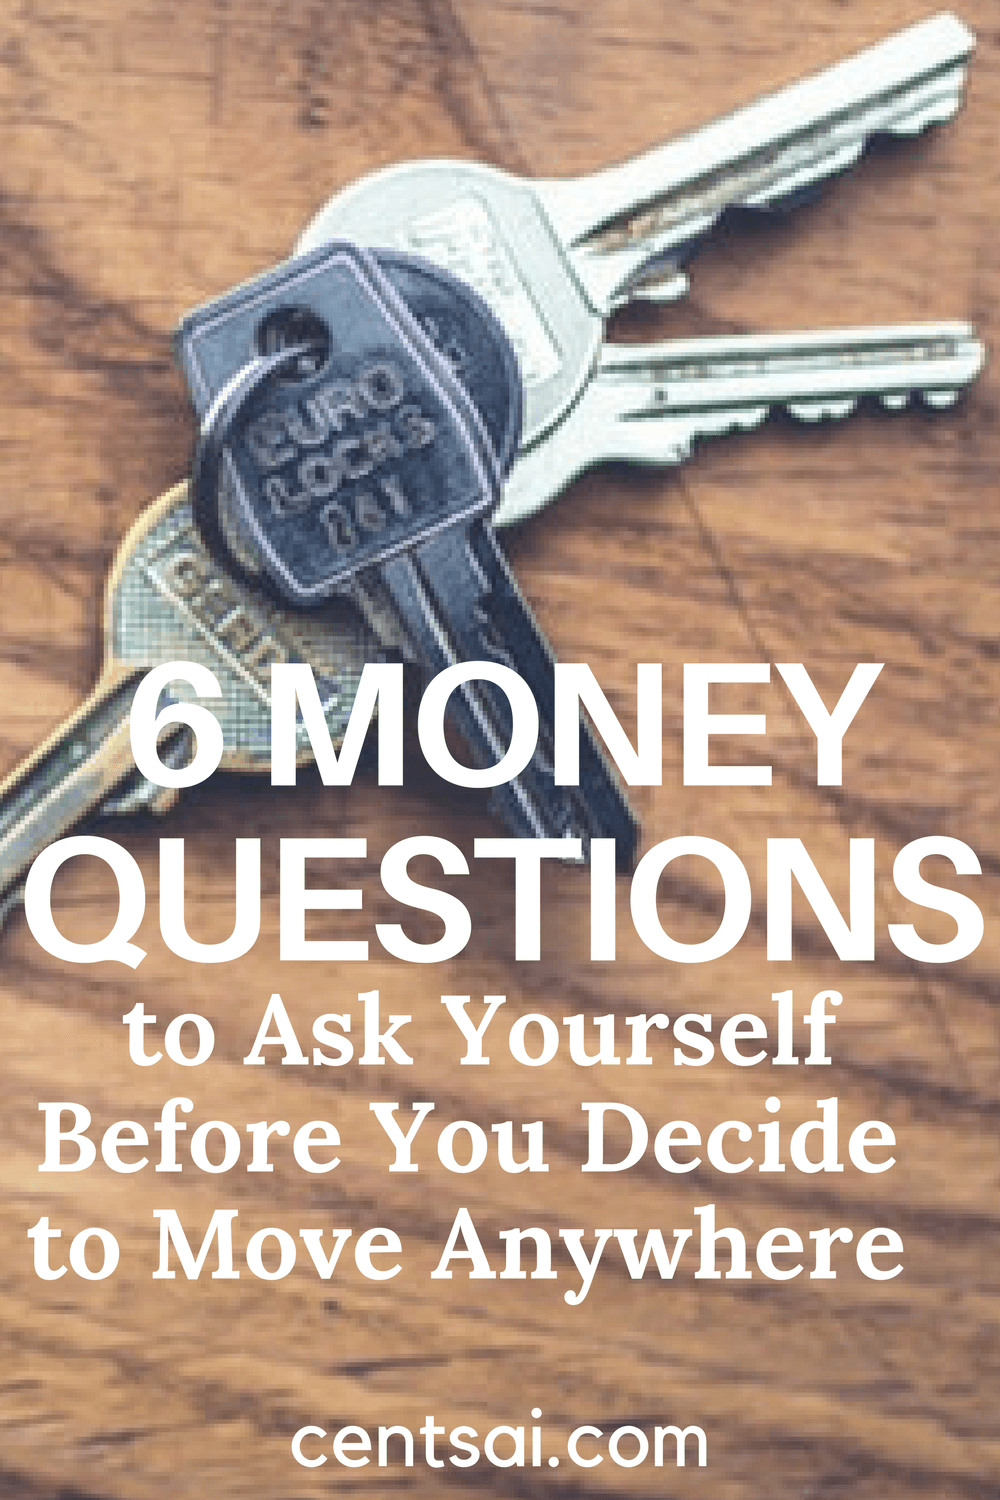 6 Money Questions to Ask Yourself Before You Decide to Move Anywhere